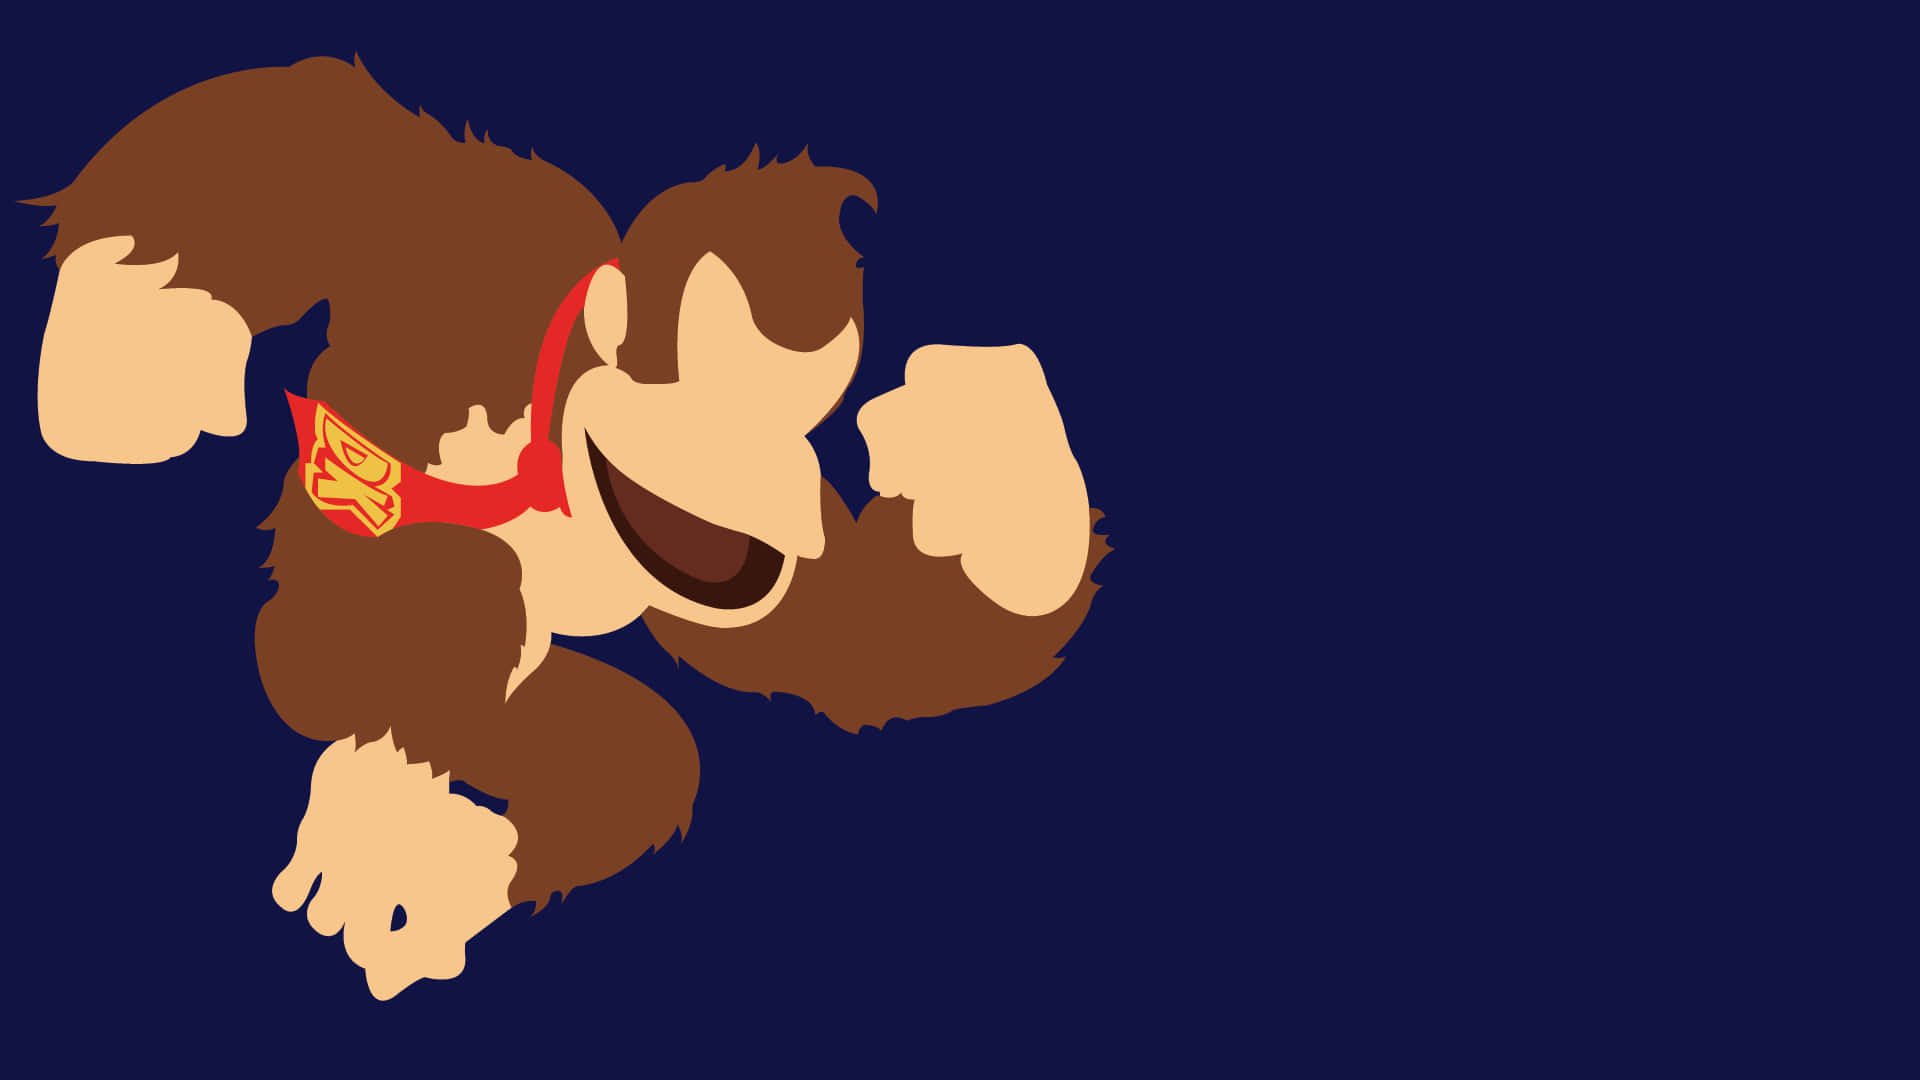 Donkey Kong In Action On A Vibrant Gaming Background